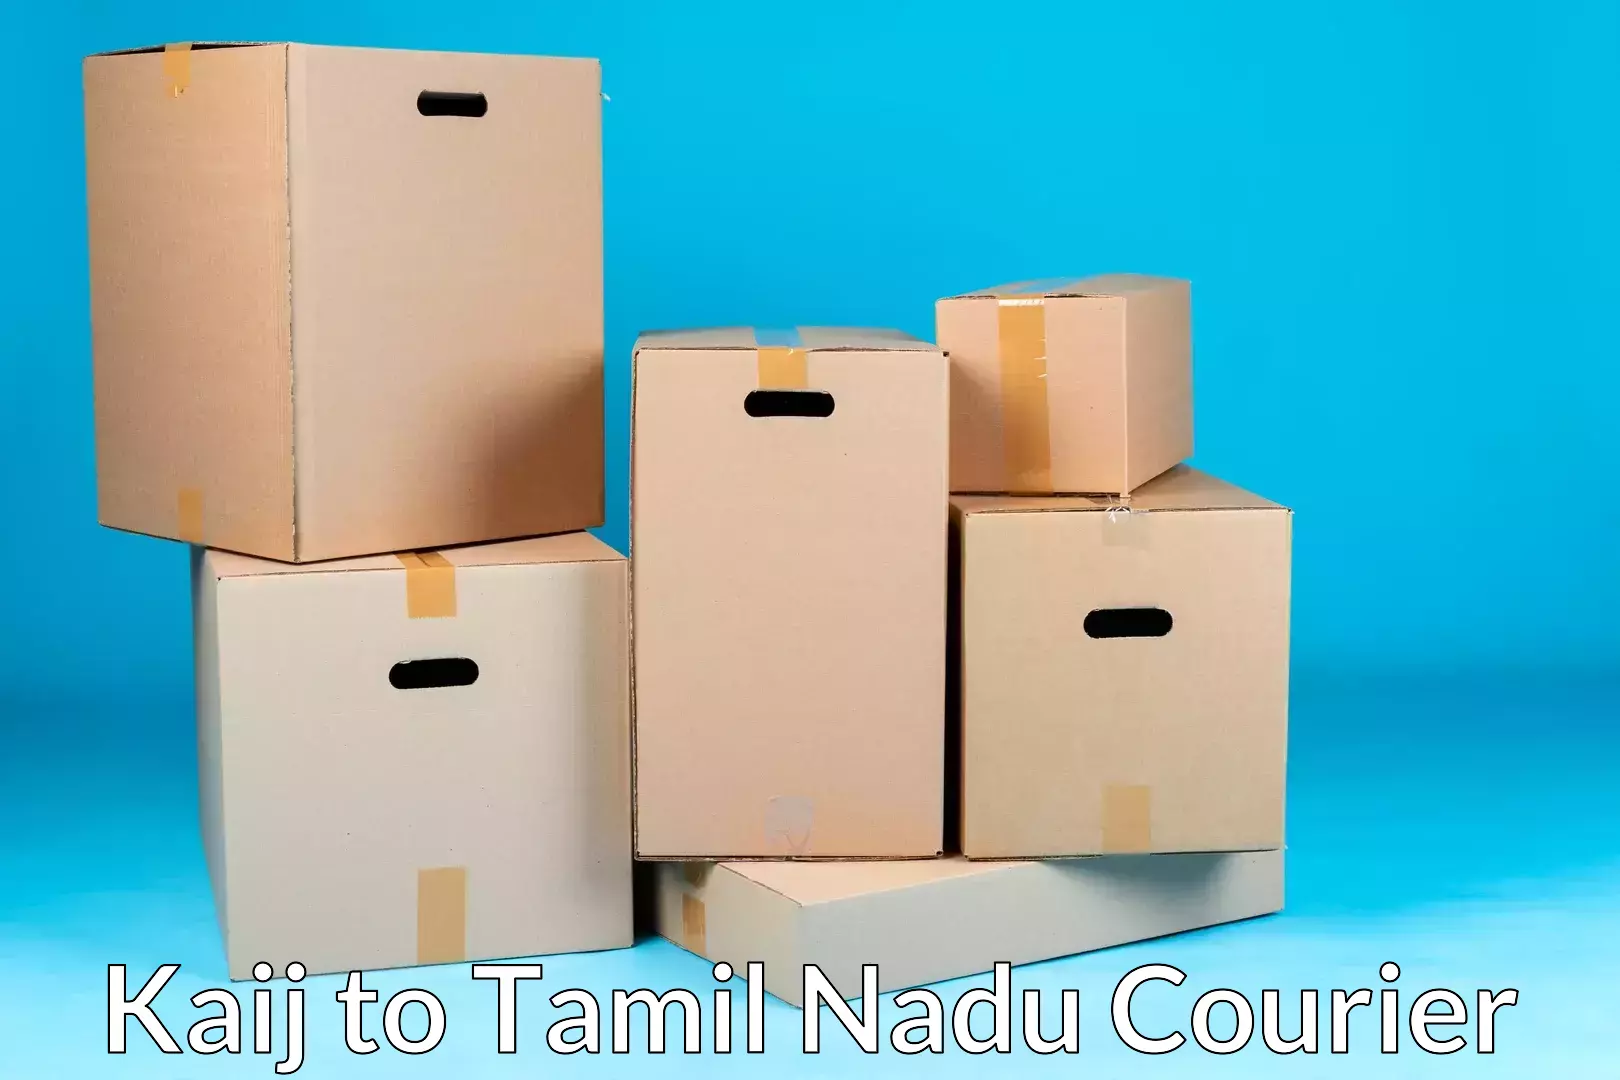 Furniture moving assistance in Kaij to Chennai Port